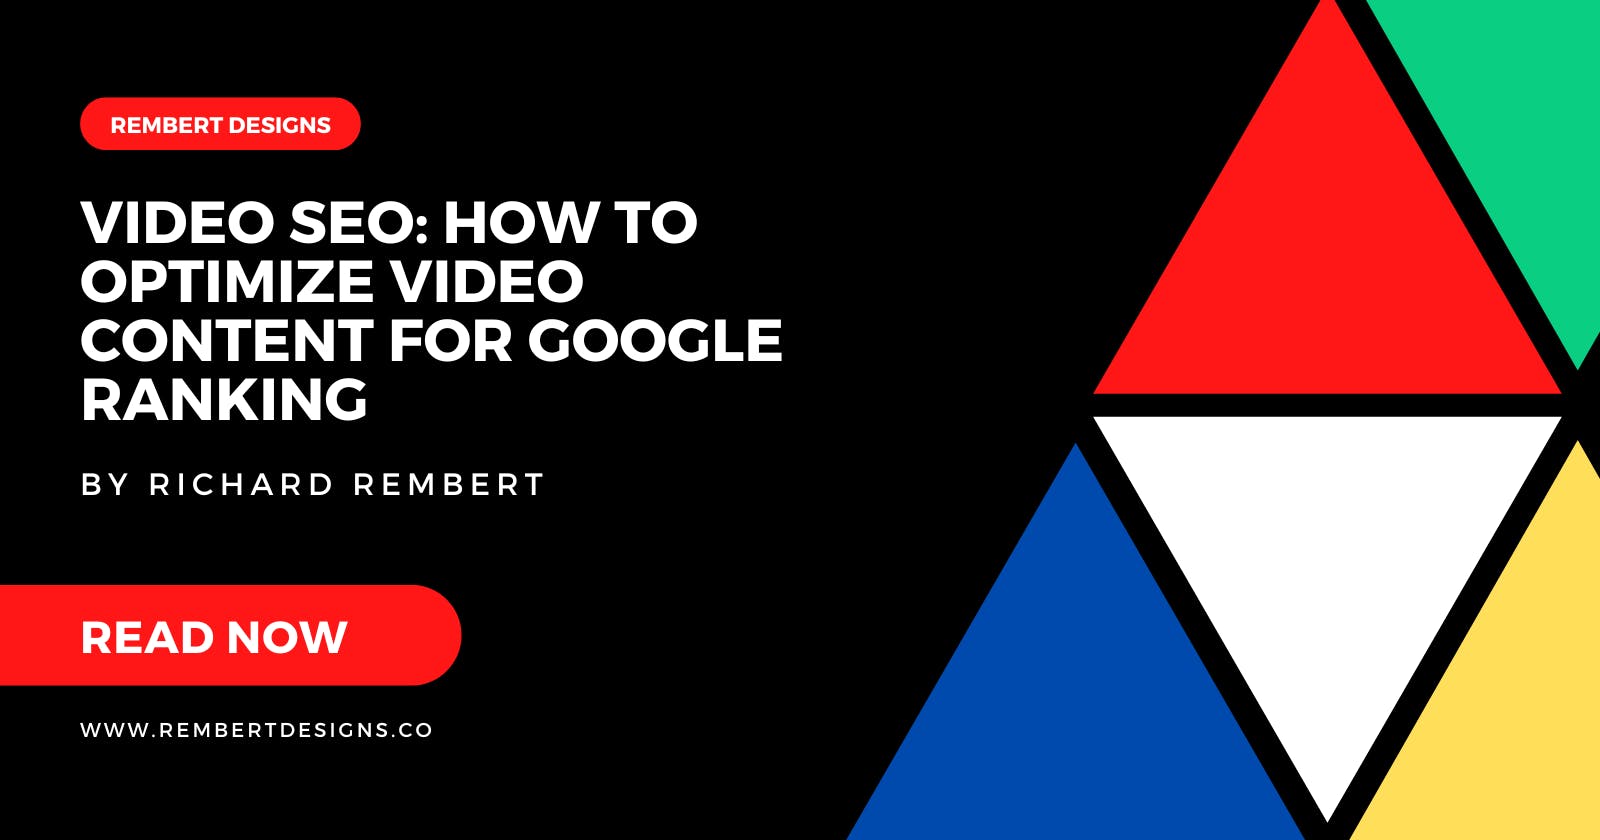 Video SEO: How to Optimize Video Content for Google Ranking